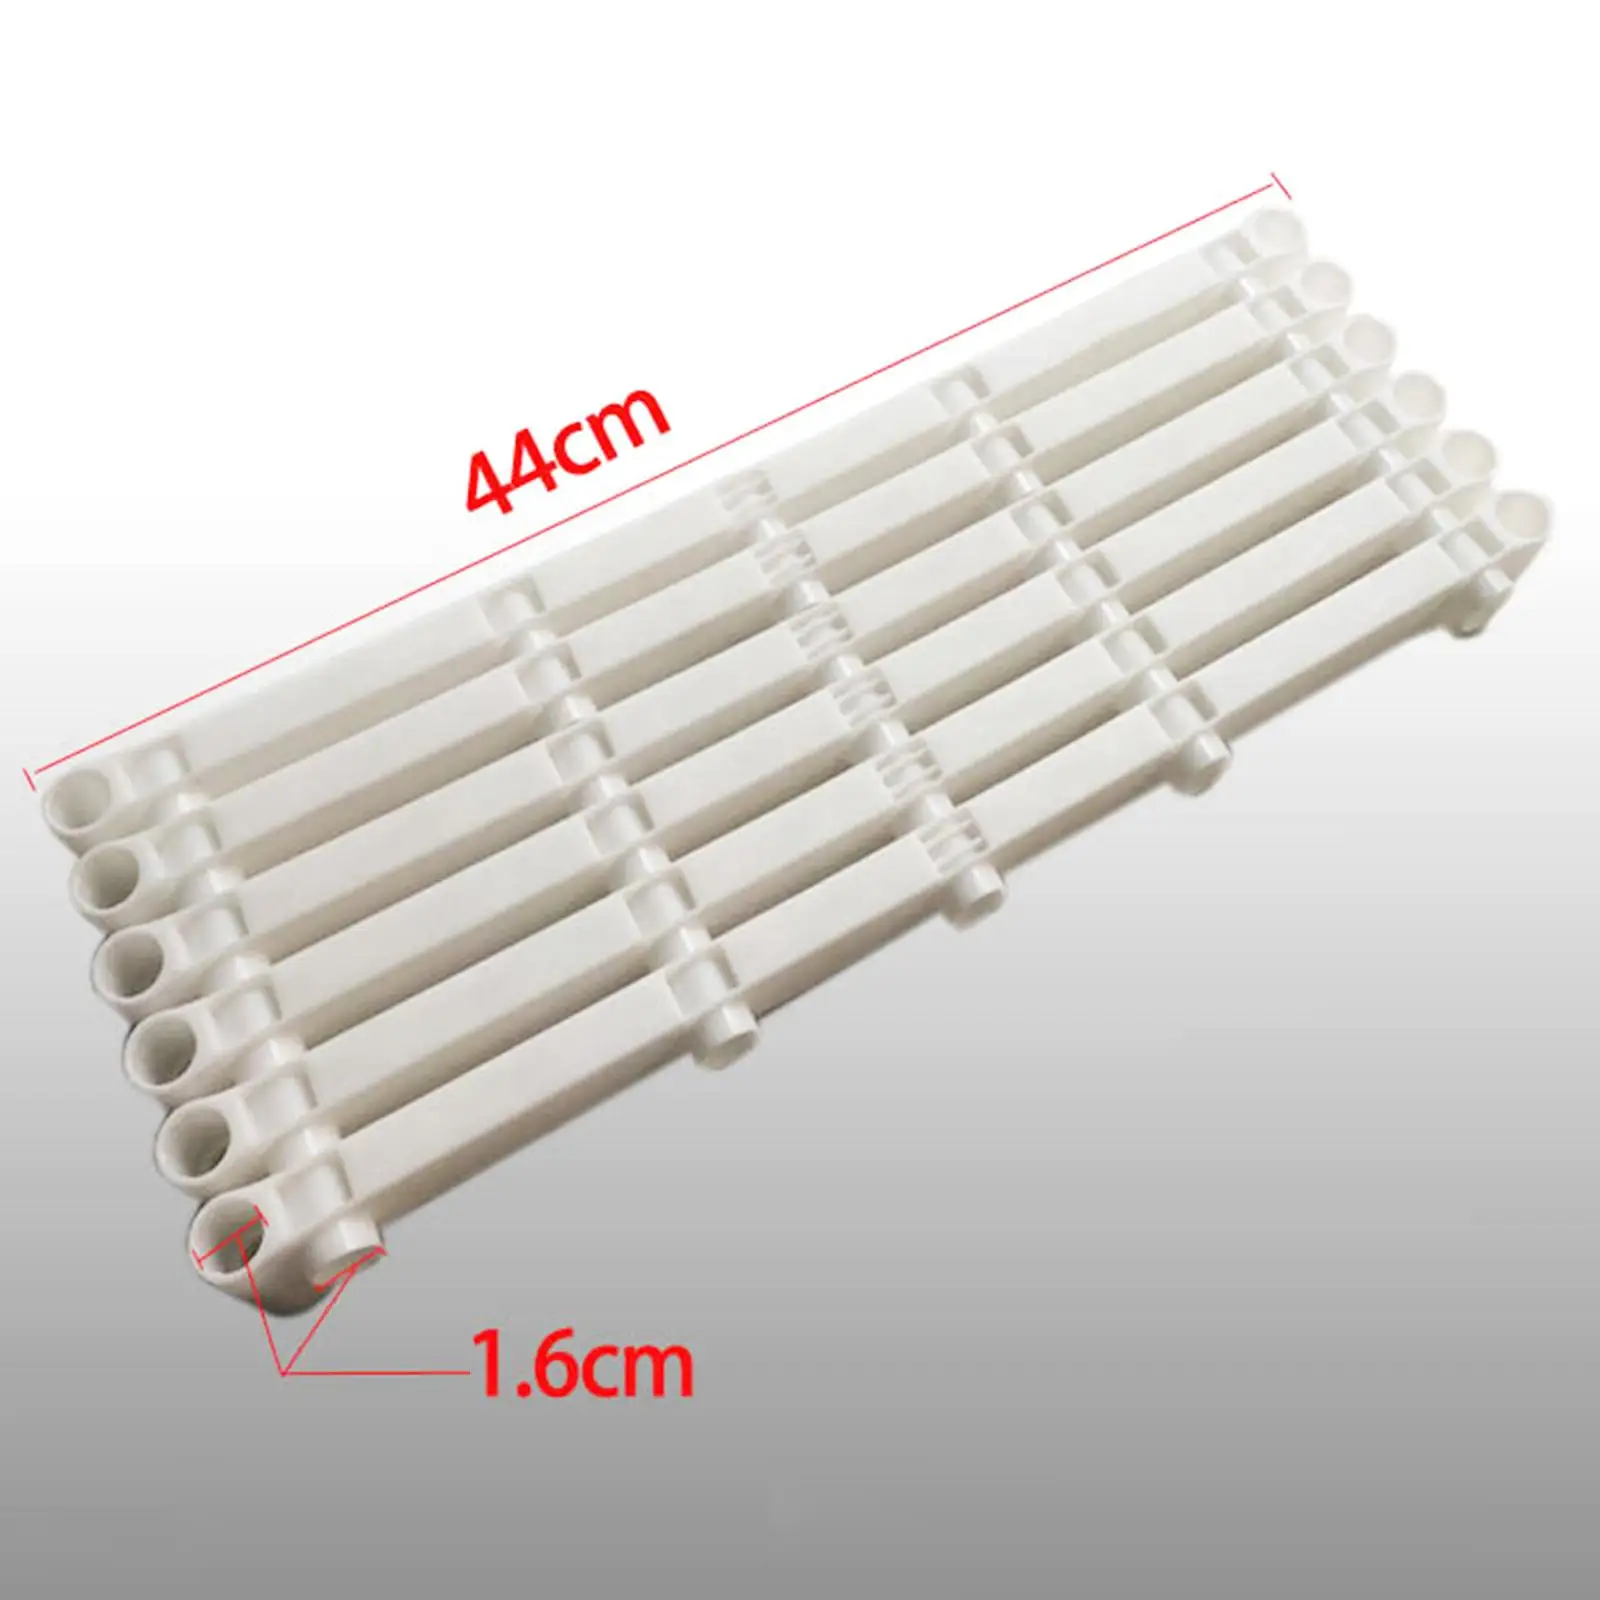 6Pcs Connector Accessories Drying Rack Connector 1.6cm Replacement Fitments Foldable Durable Connecting Rod for Bedroom Home Use